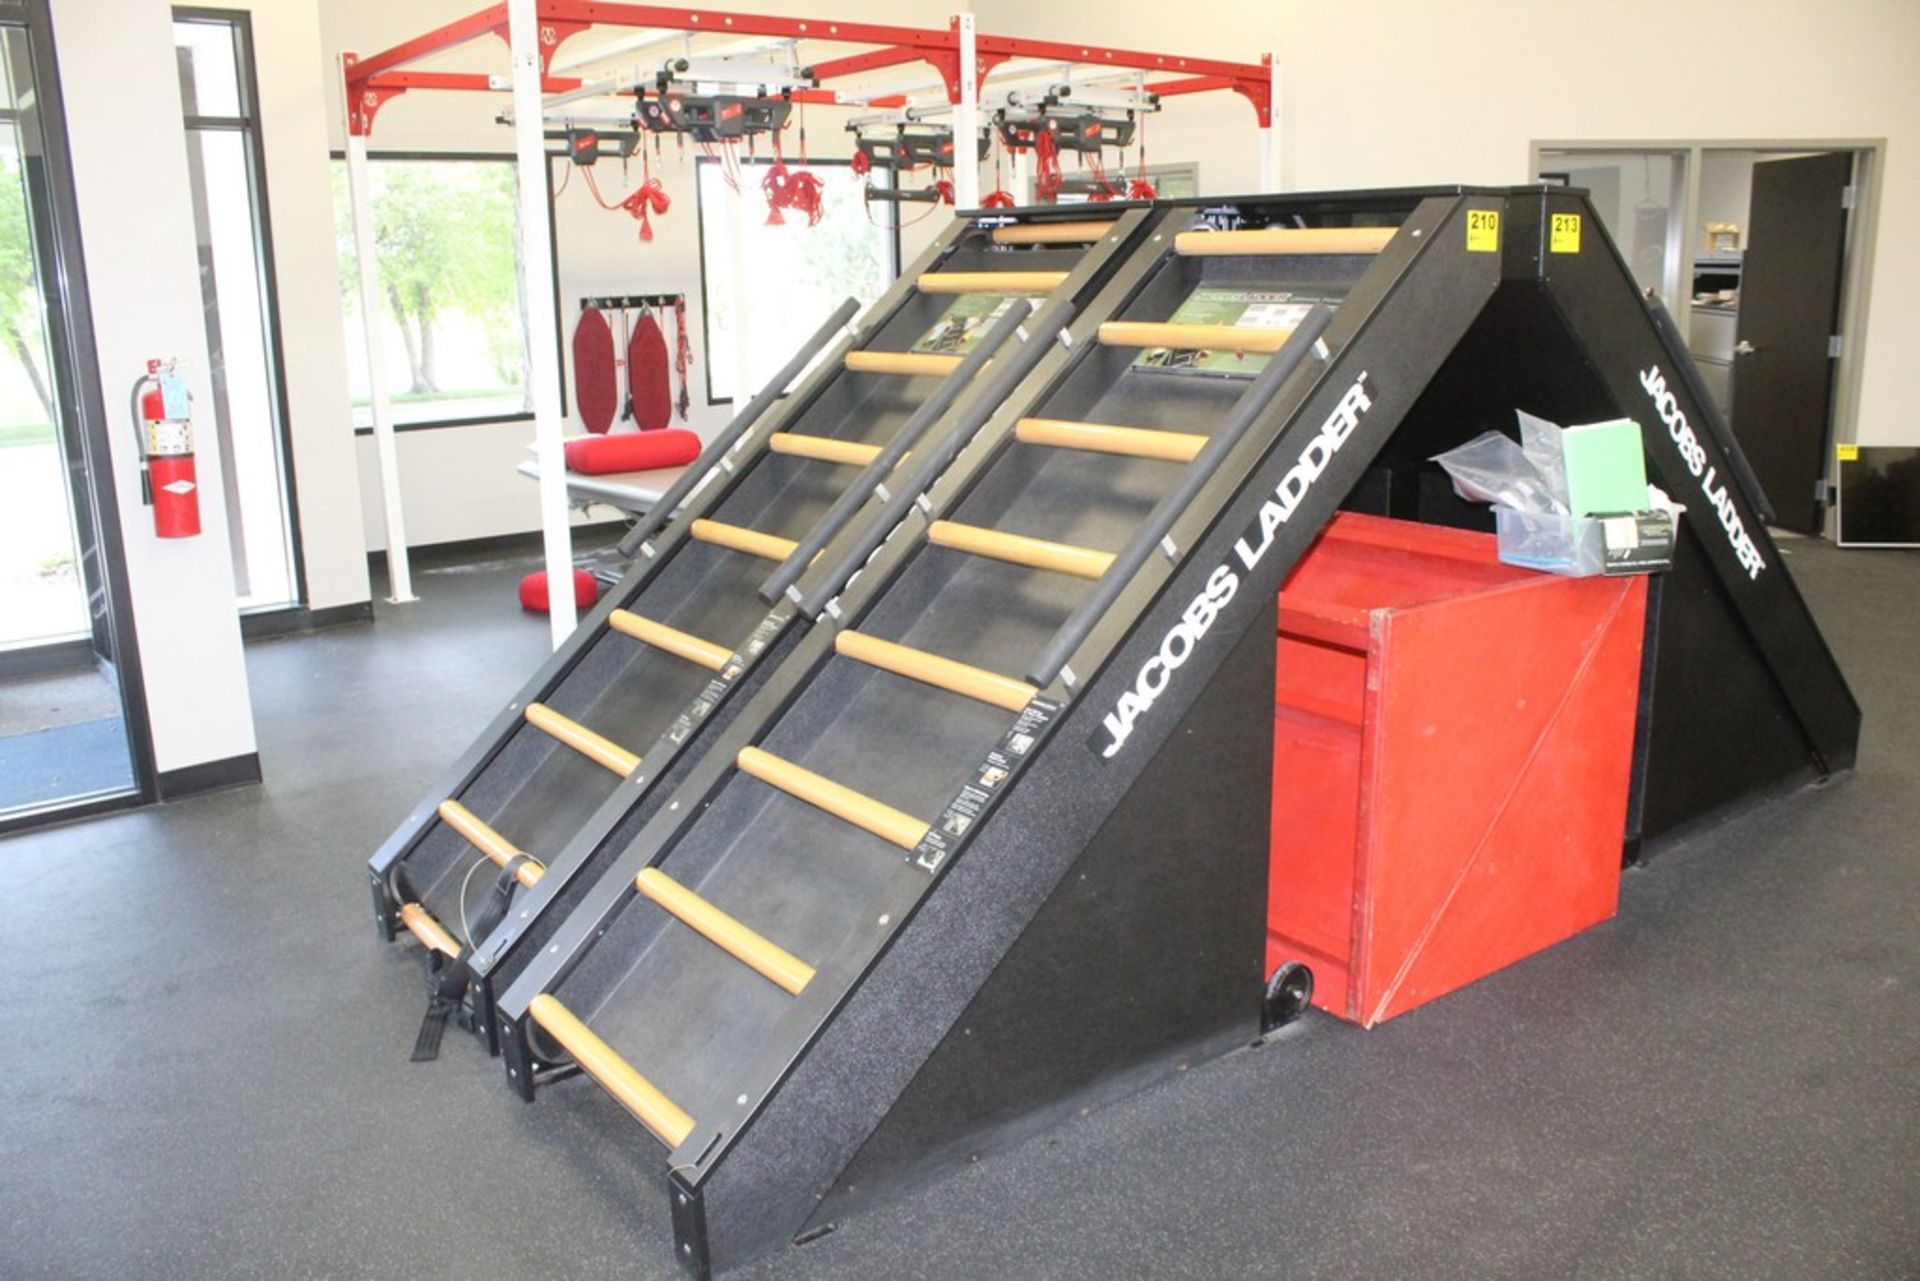 JACOBS LADDER TREADMILL STYLE LADDER MACHINE, S/N 10151 WITH DIGITAL PANEL